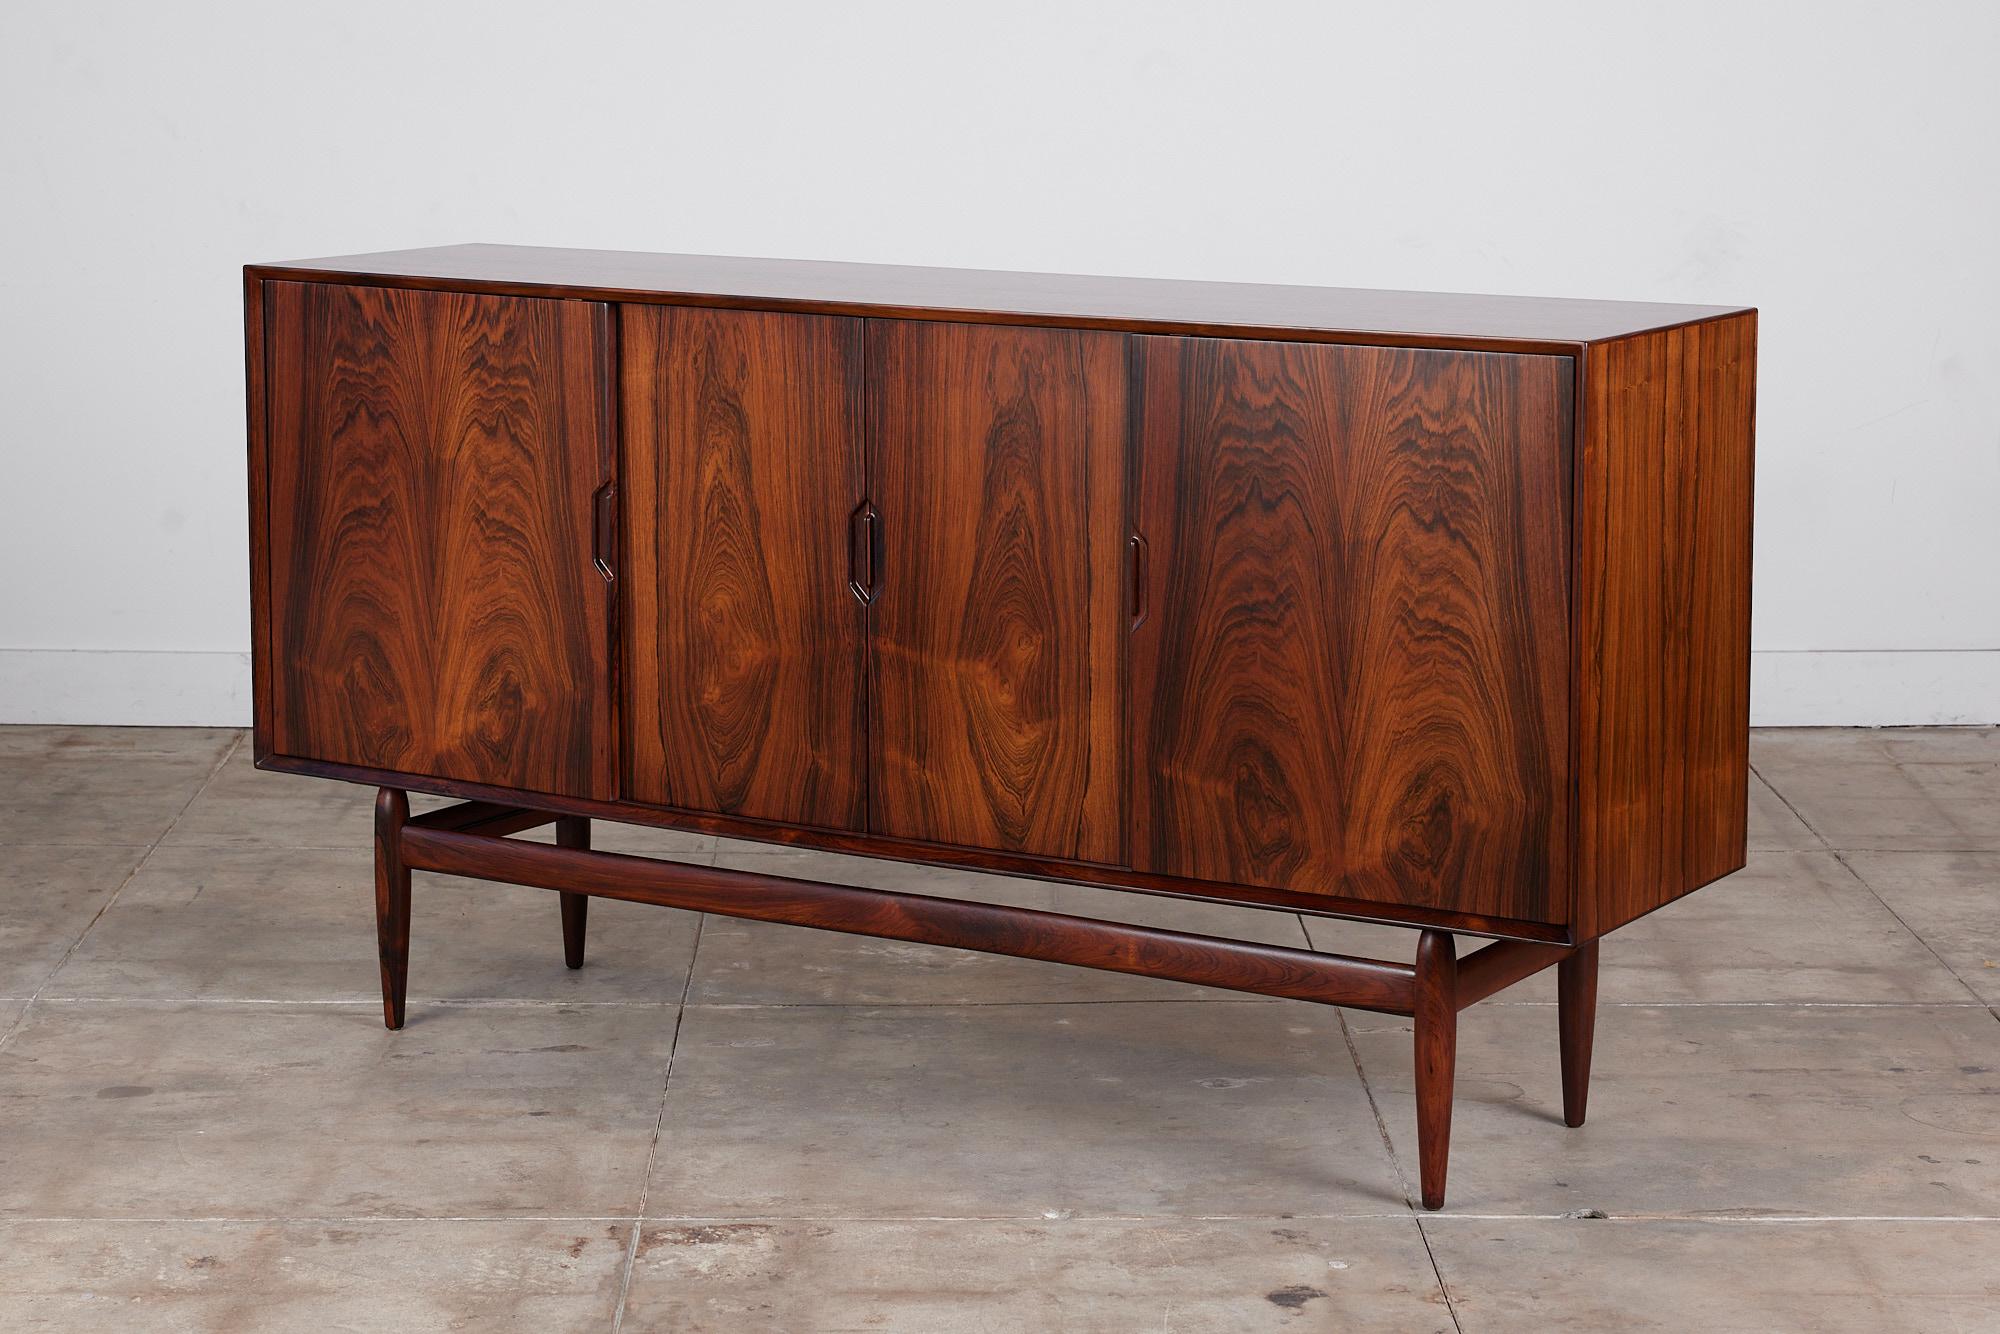 A striking rosewood credenza by Danish born designer Kurt Østervig for Brande Mobelindustri, circa 1960s, Denmark. The credenza features four sliding rosewood doors with beautiful wood grain. The two center doors open to reveal seven storage drawers